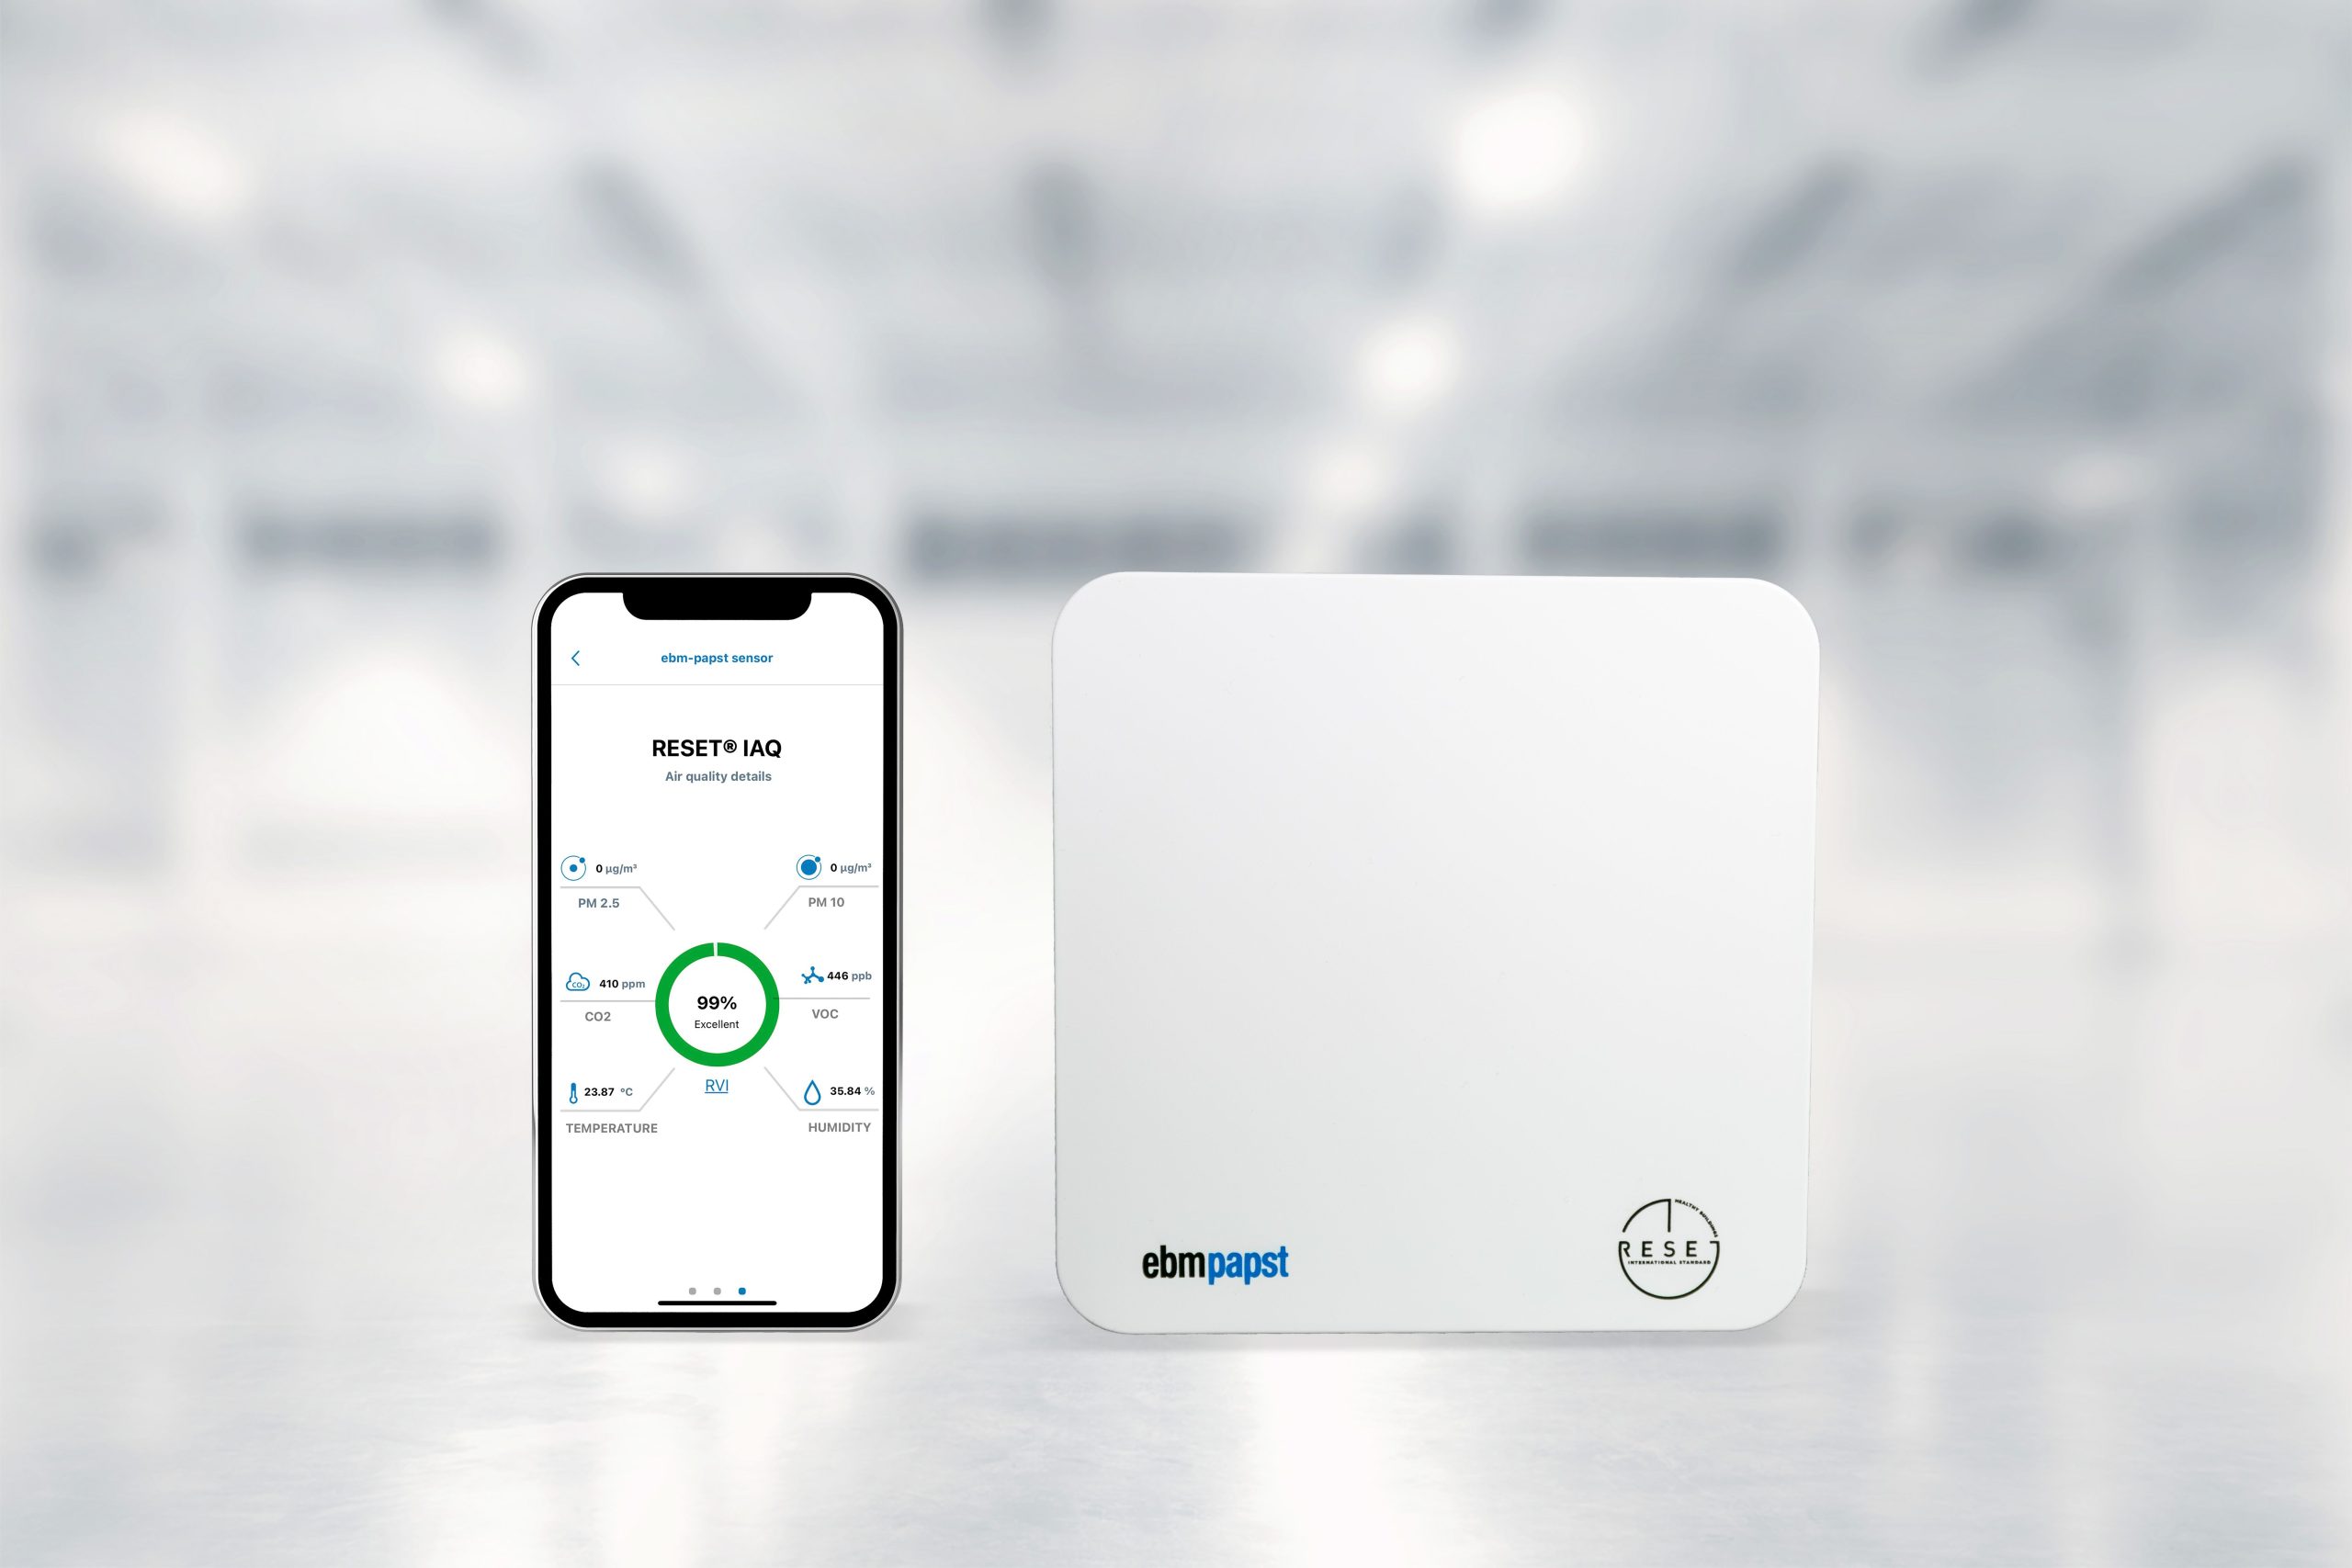 RS announces availability of  new indoor air-quality monitor from ebm-papst